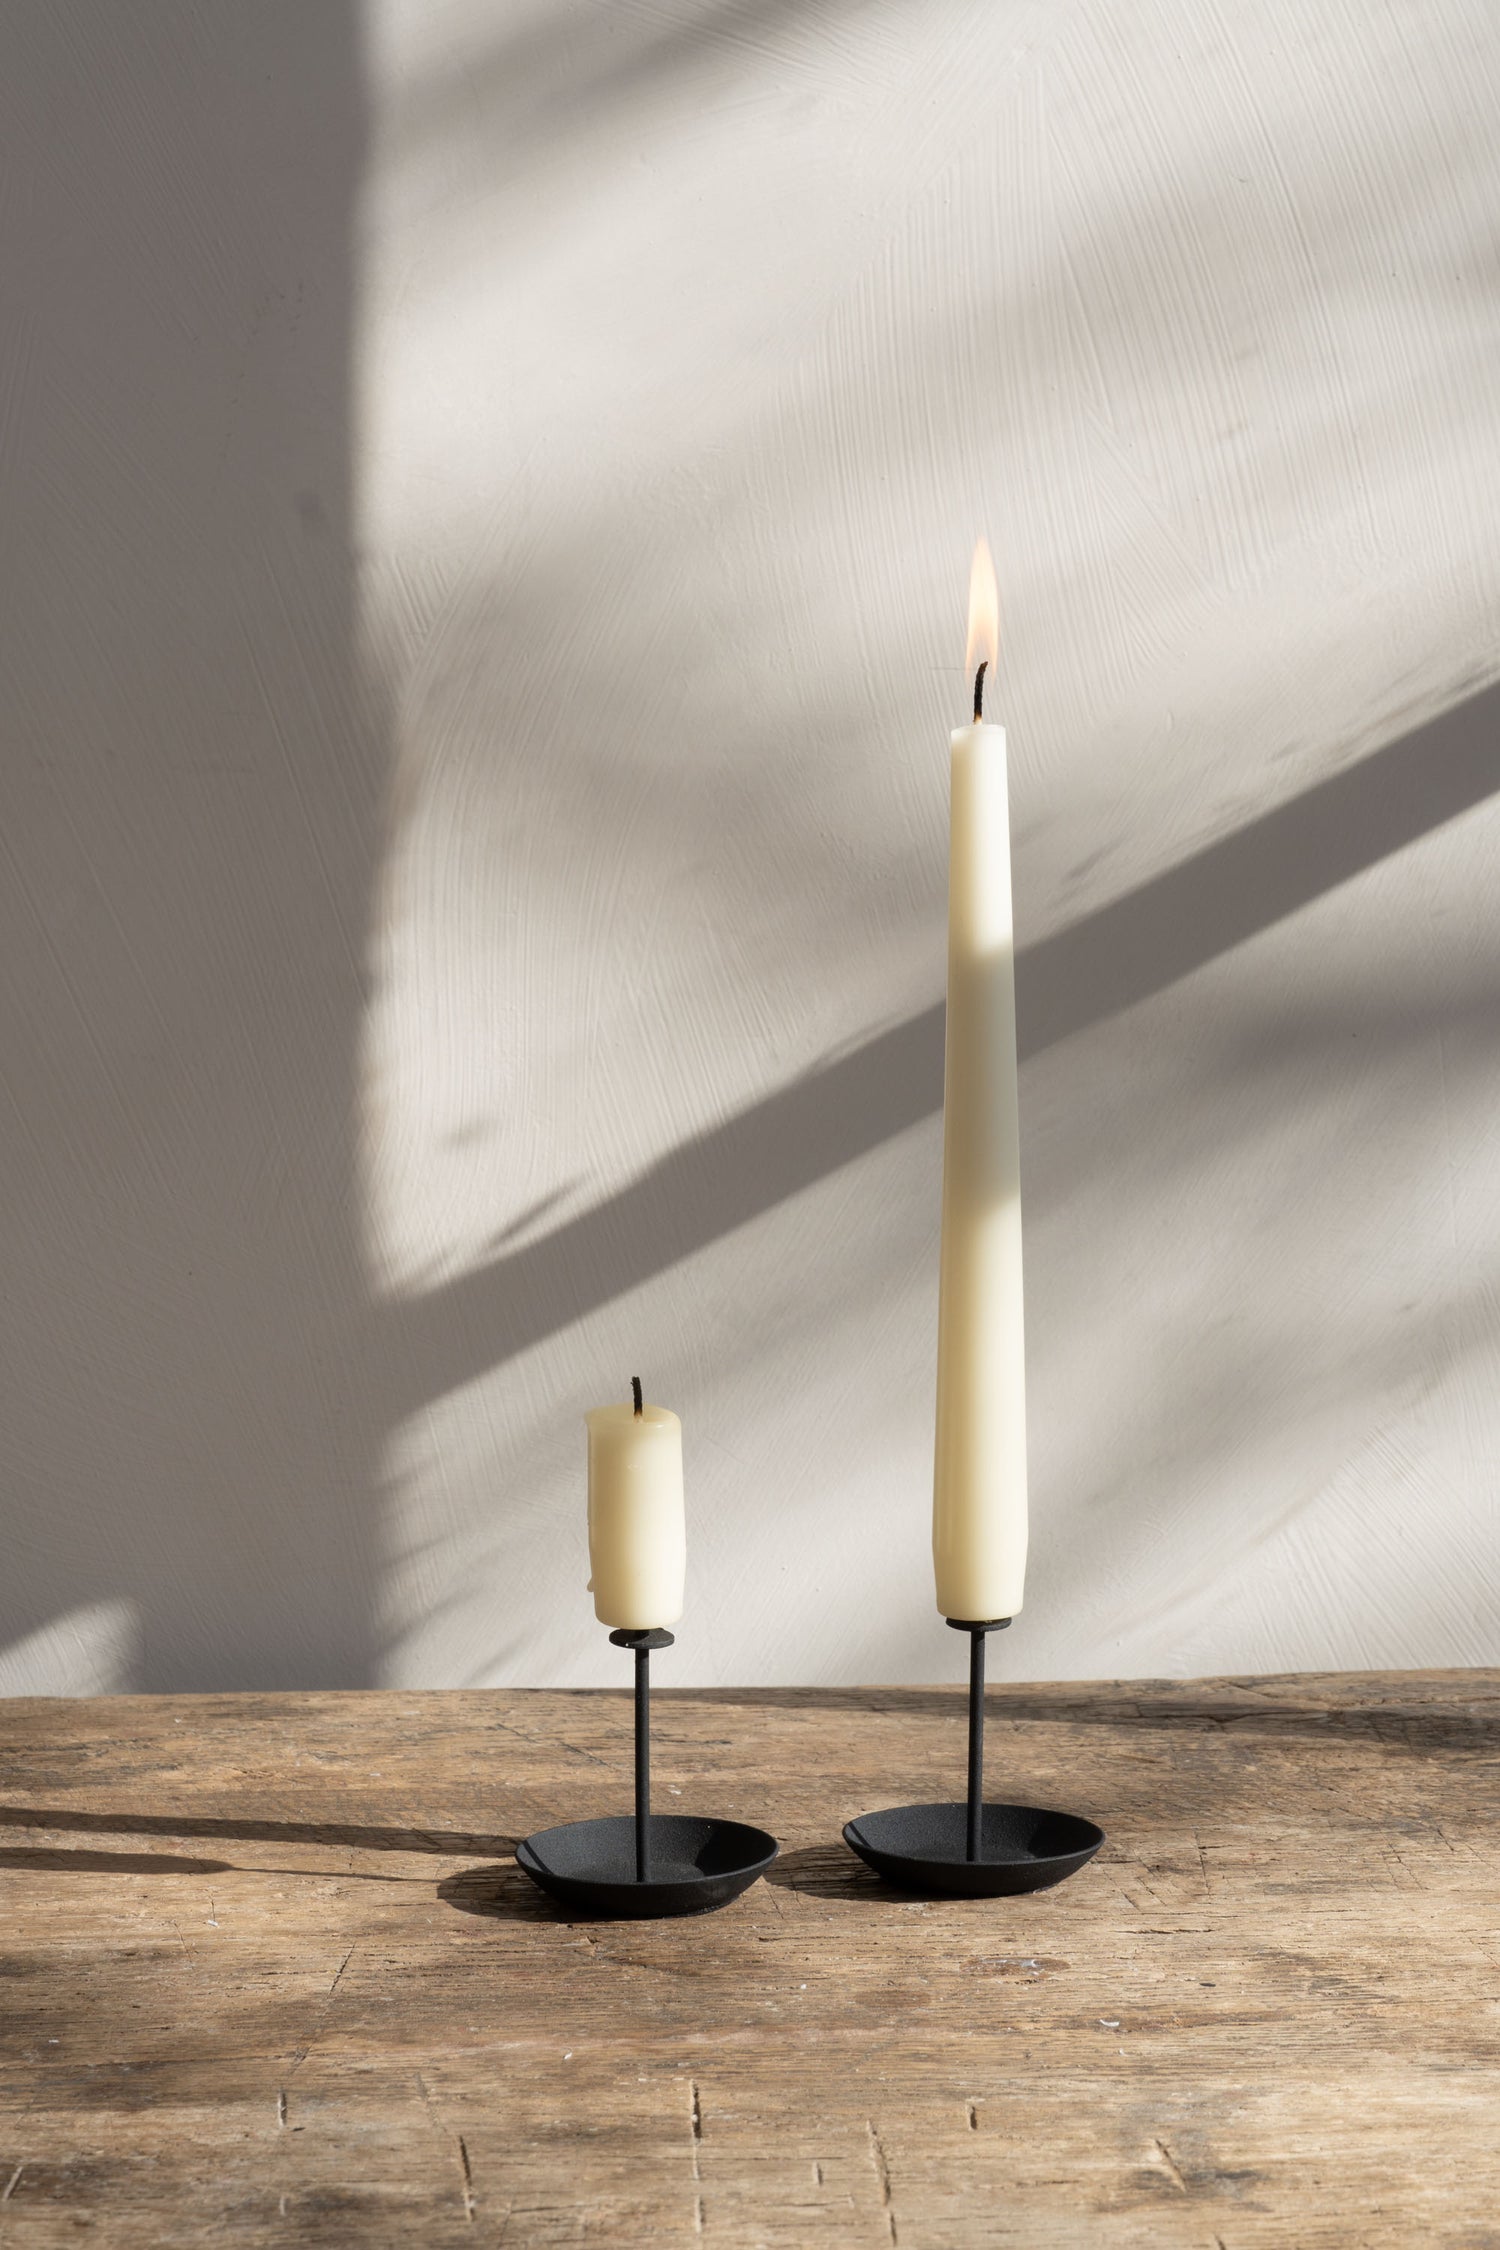 ENO Studio Micro Candle Pin Black (set of 2) -  metal candle holder in use, holding small candles securely in place. Enhances stability and creates a visually appealing display.